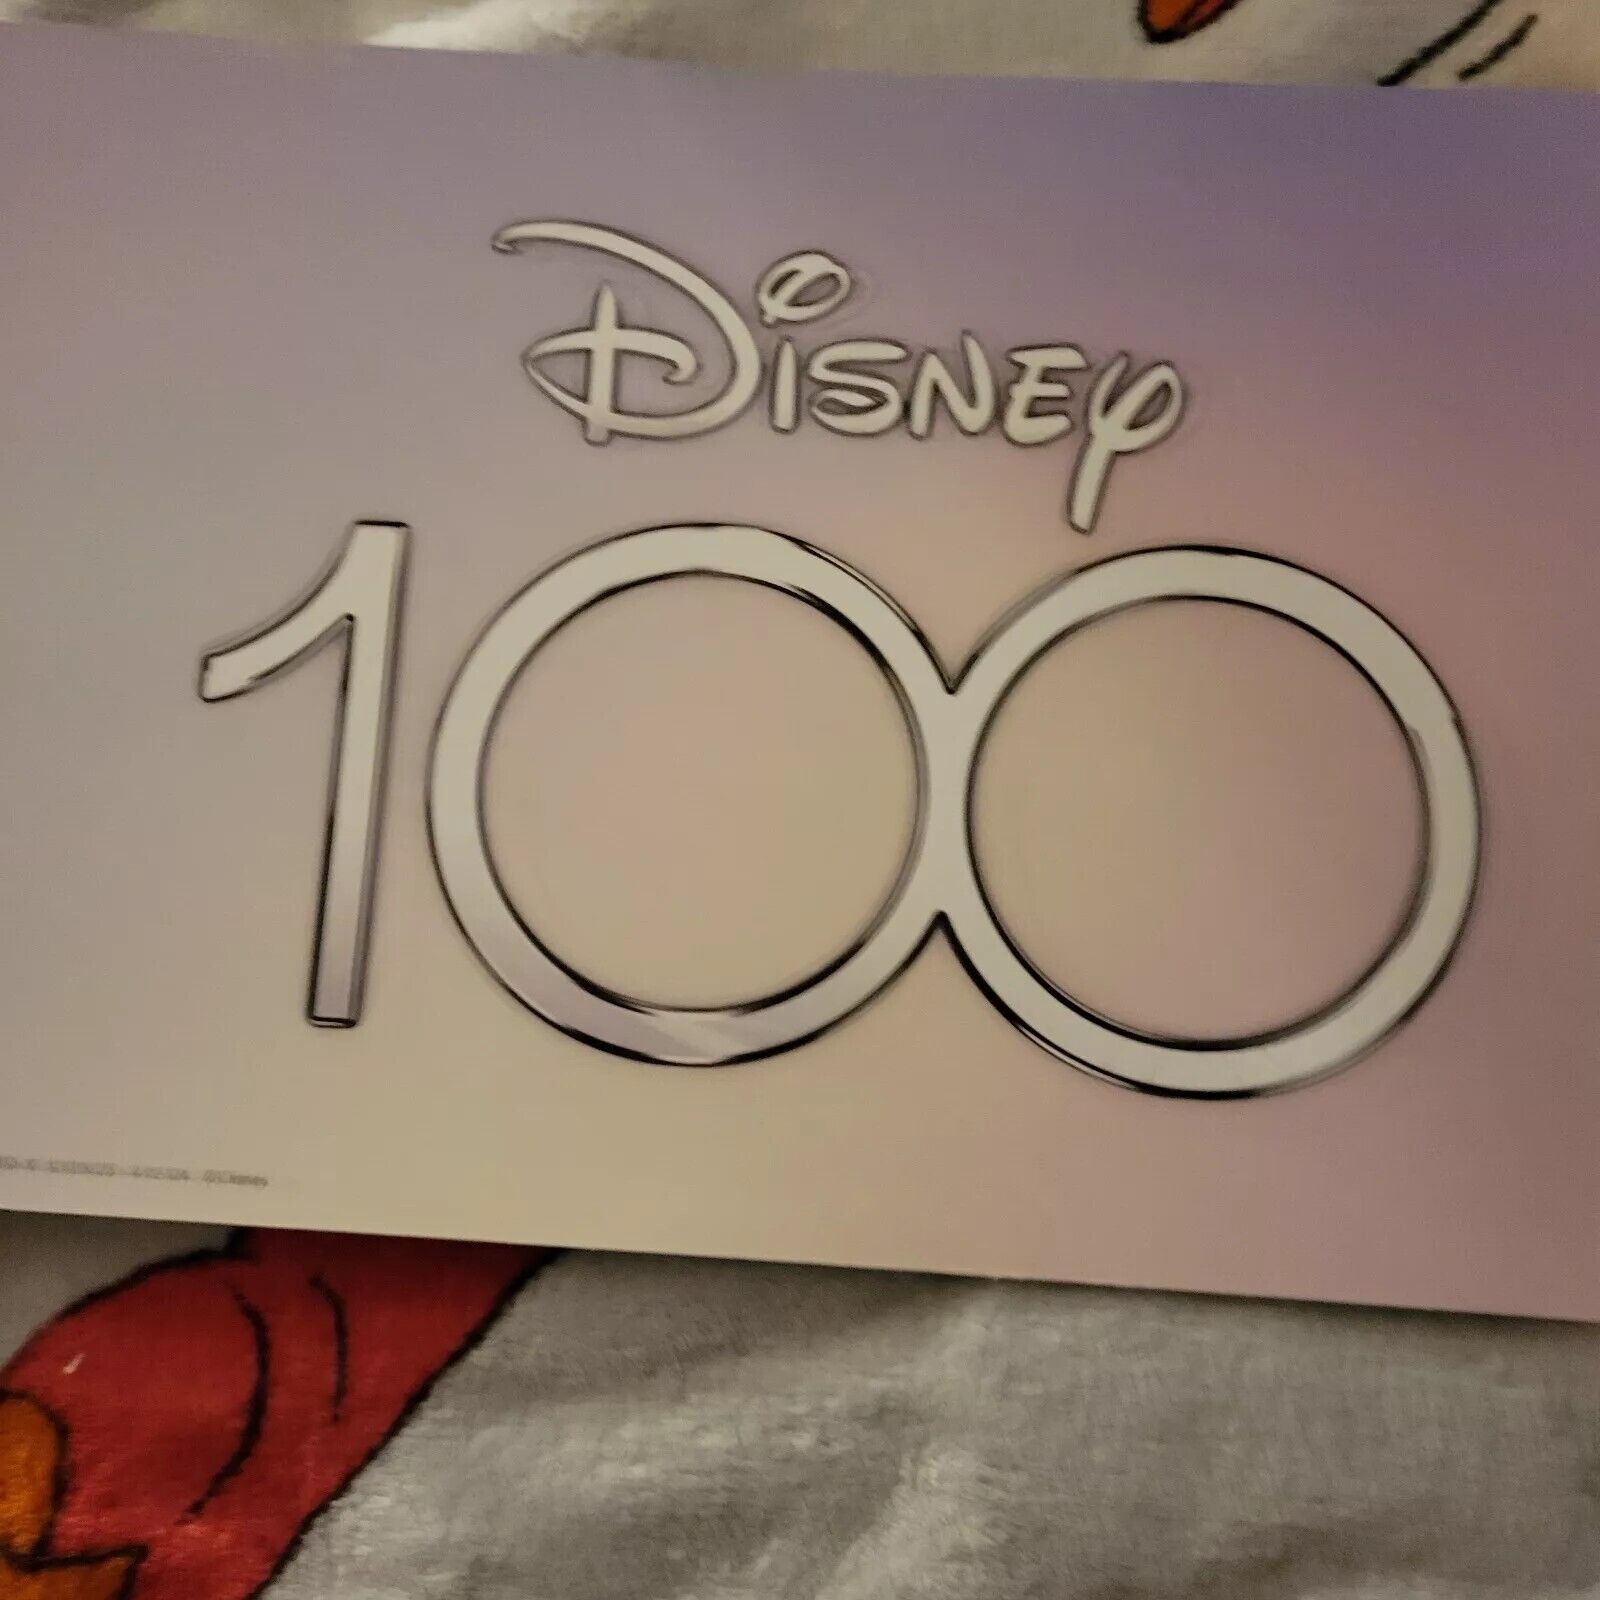 Disney 100 Promotional Sign Poster HUGE 29x10  Heavy Cardboard  Double Sided